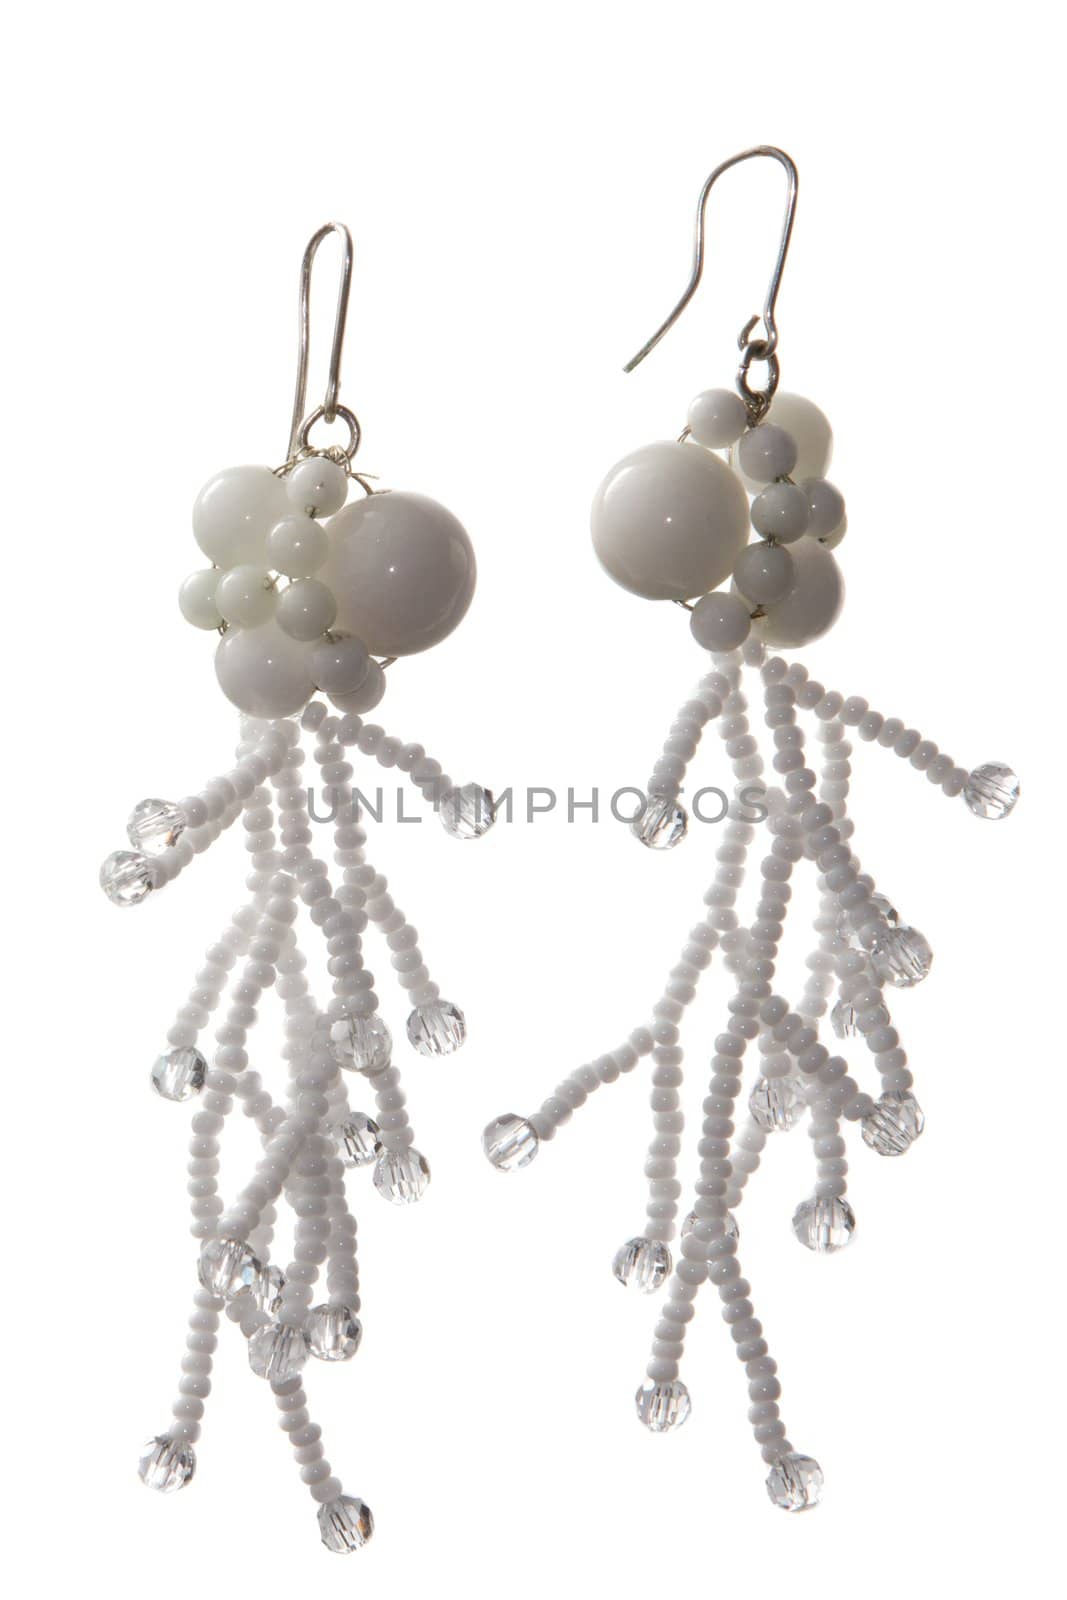 Unique handmade white snow earrings with kohalongs and bead branches